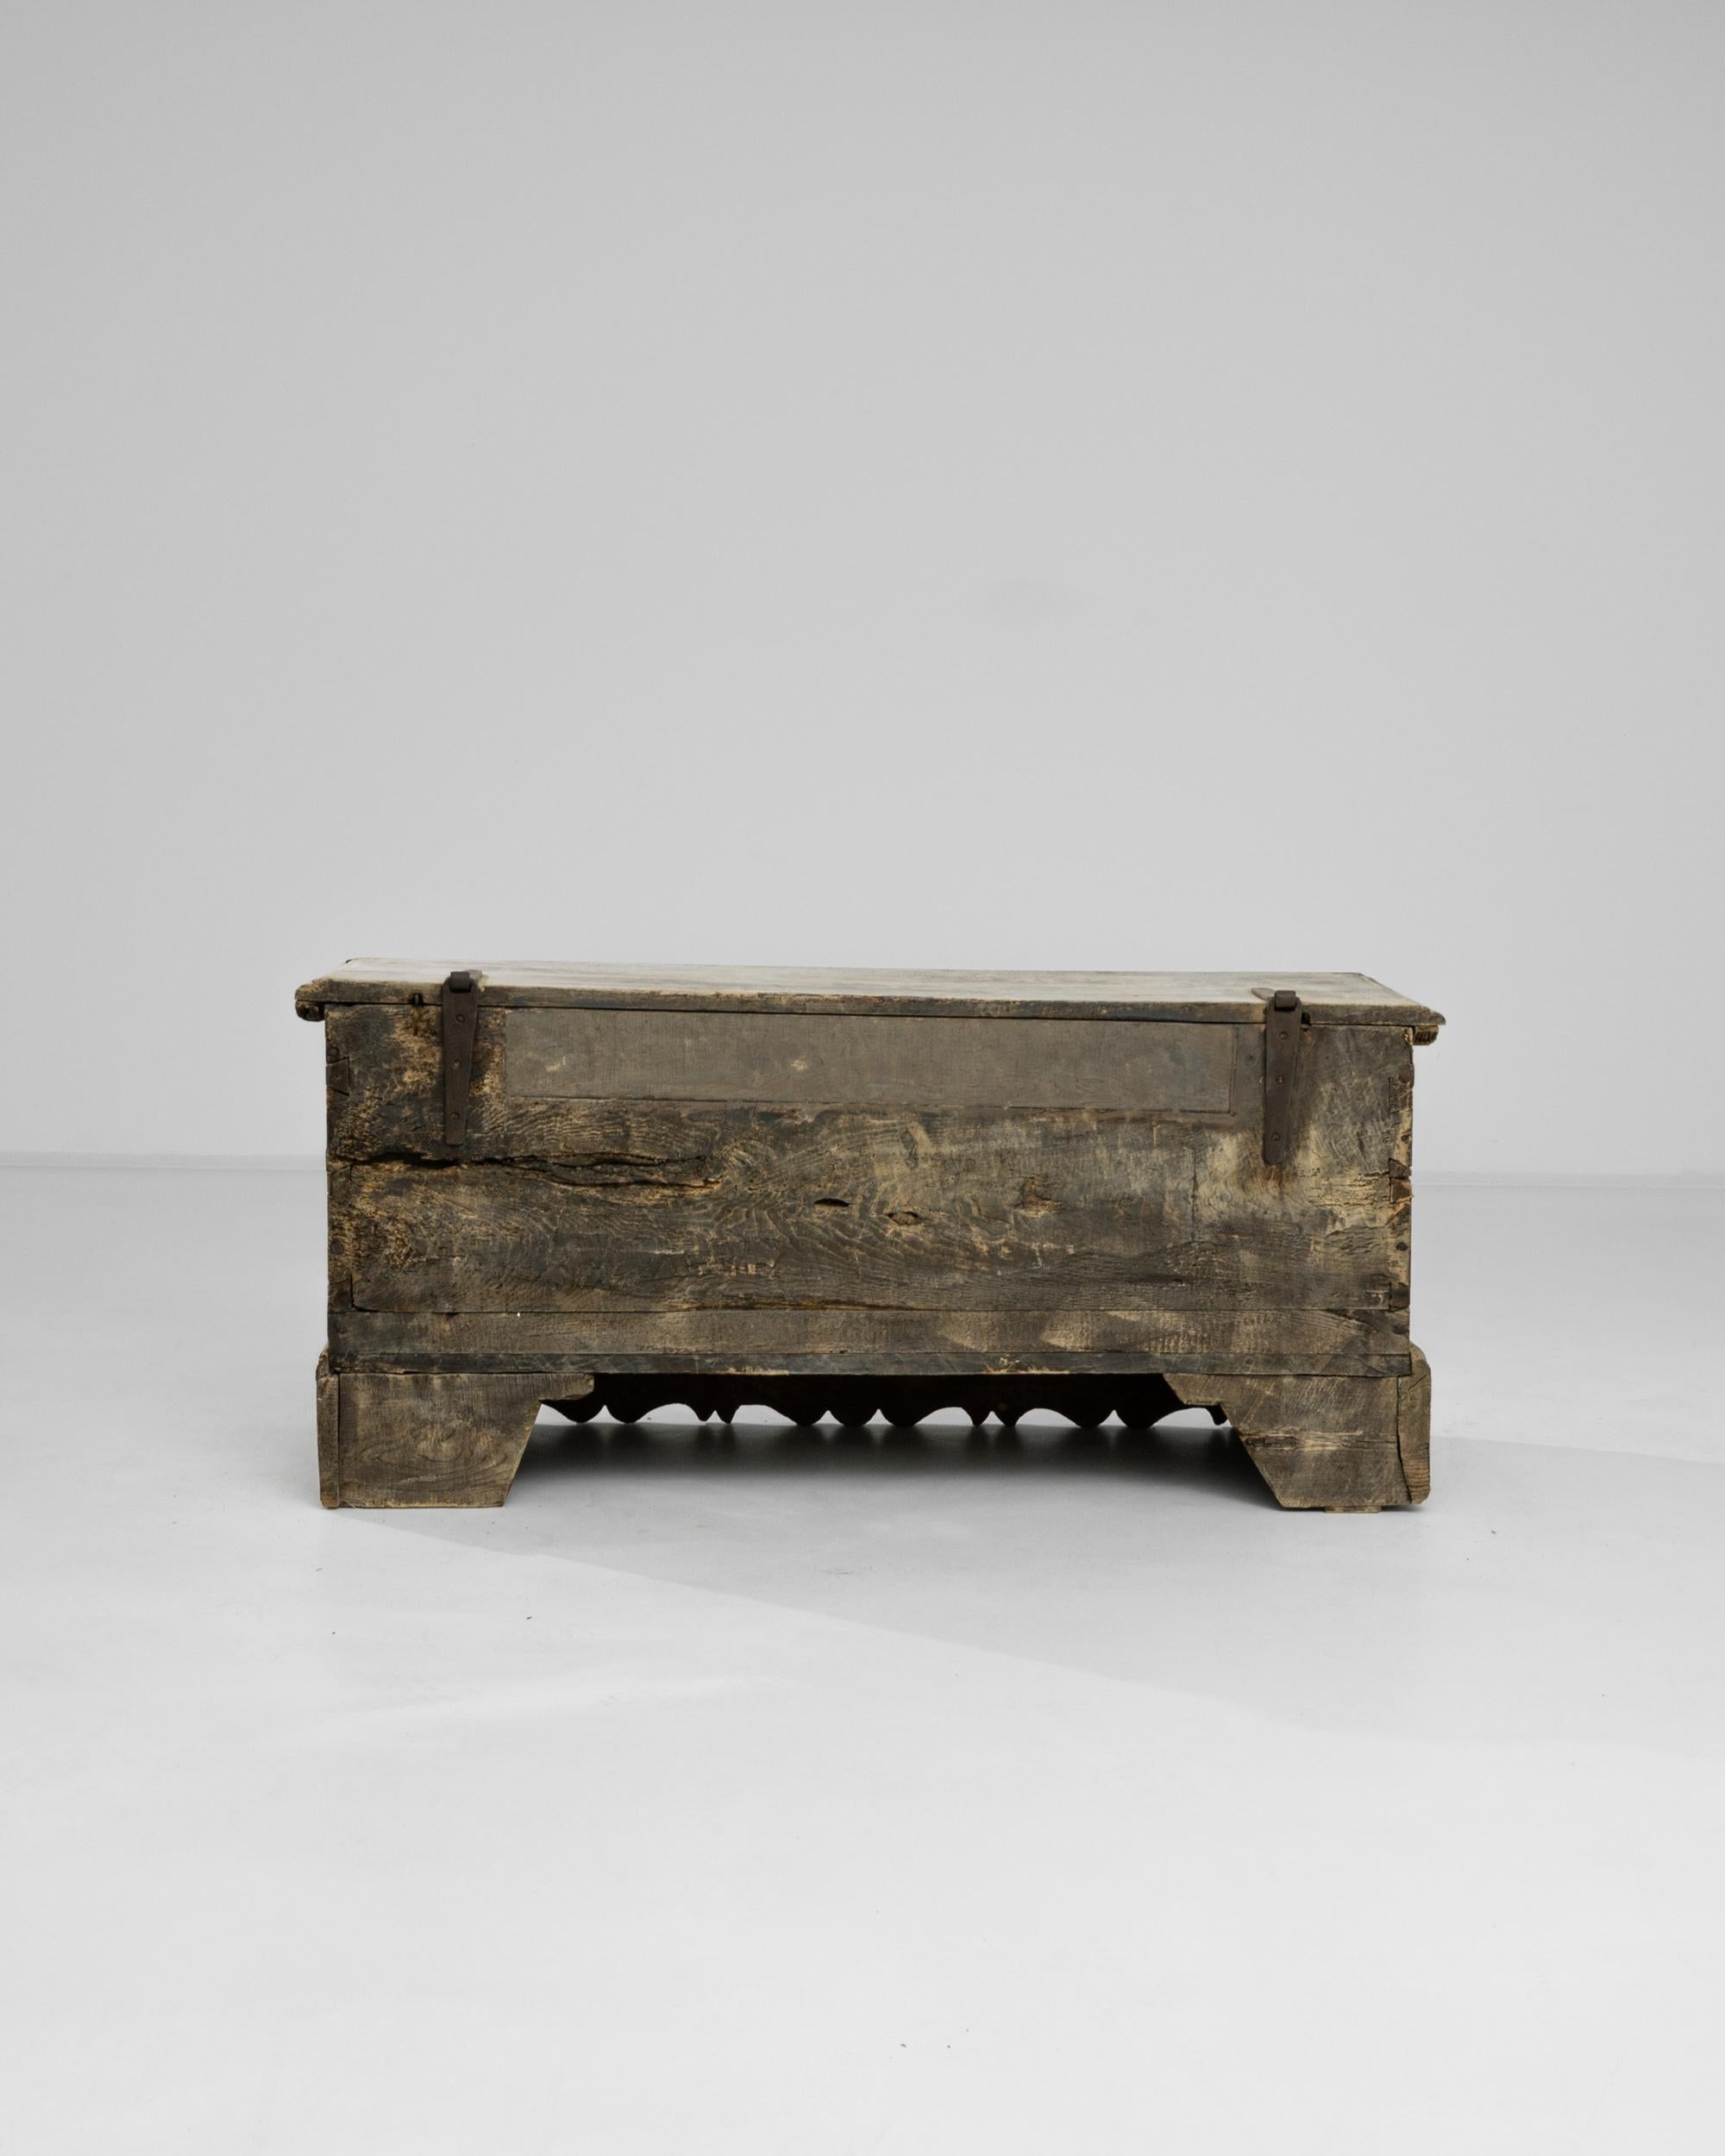 Transport your space to the 1750s with the French Bleached Oak Trunk, a captivating piece that echoes the sophistication of its era. The bottom of the trunk boasts incredible ornate details, showcasing the exquisite craftsmanship of the time. With a